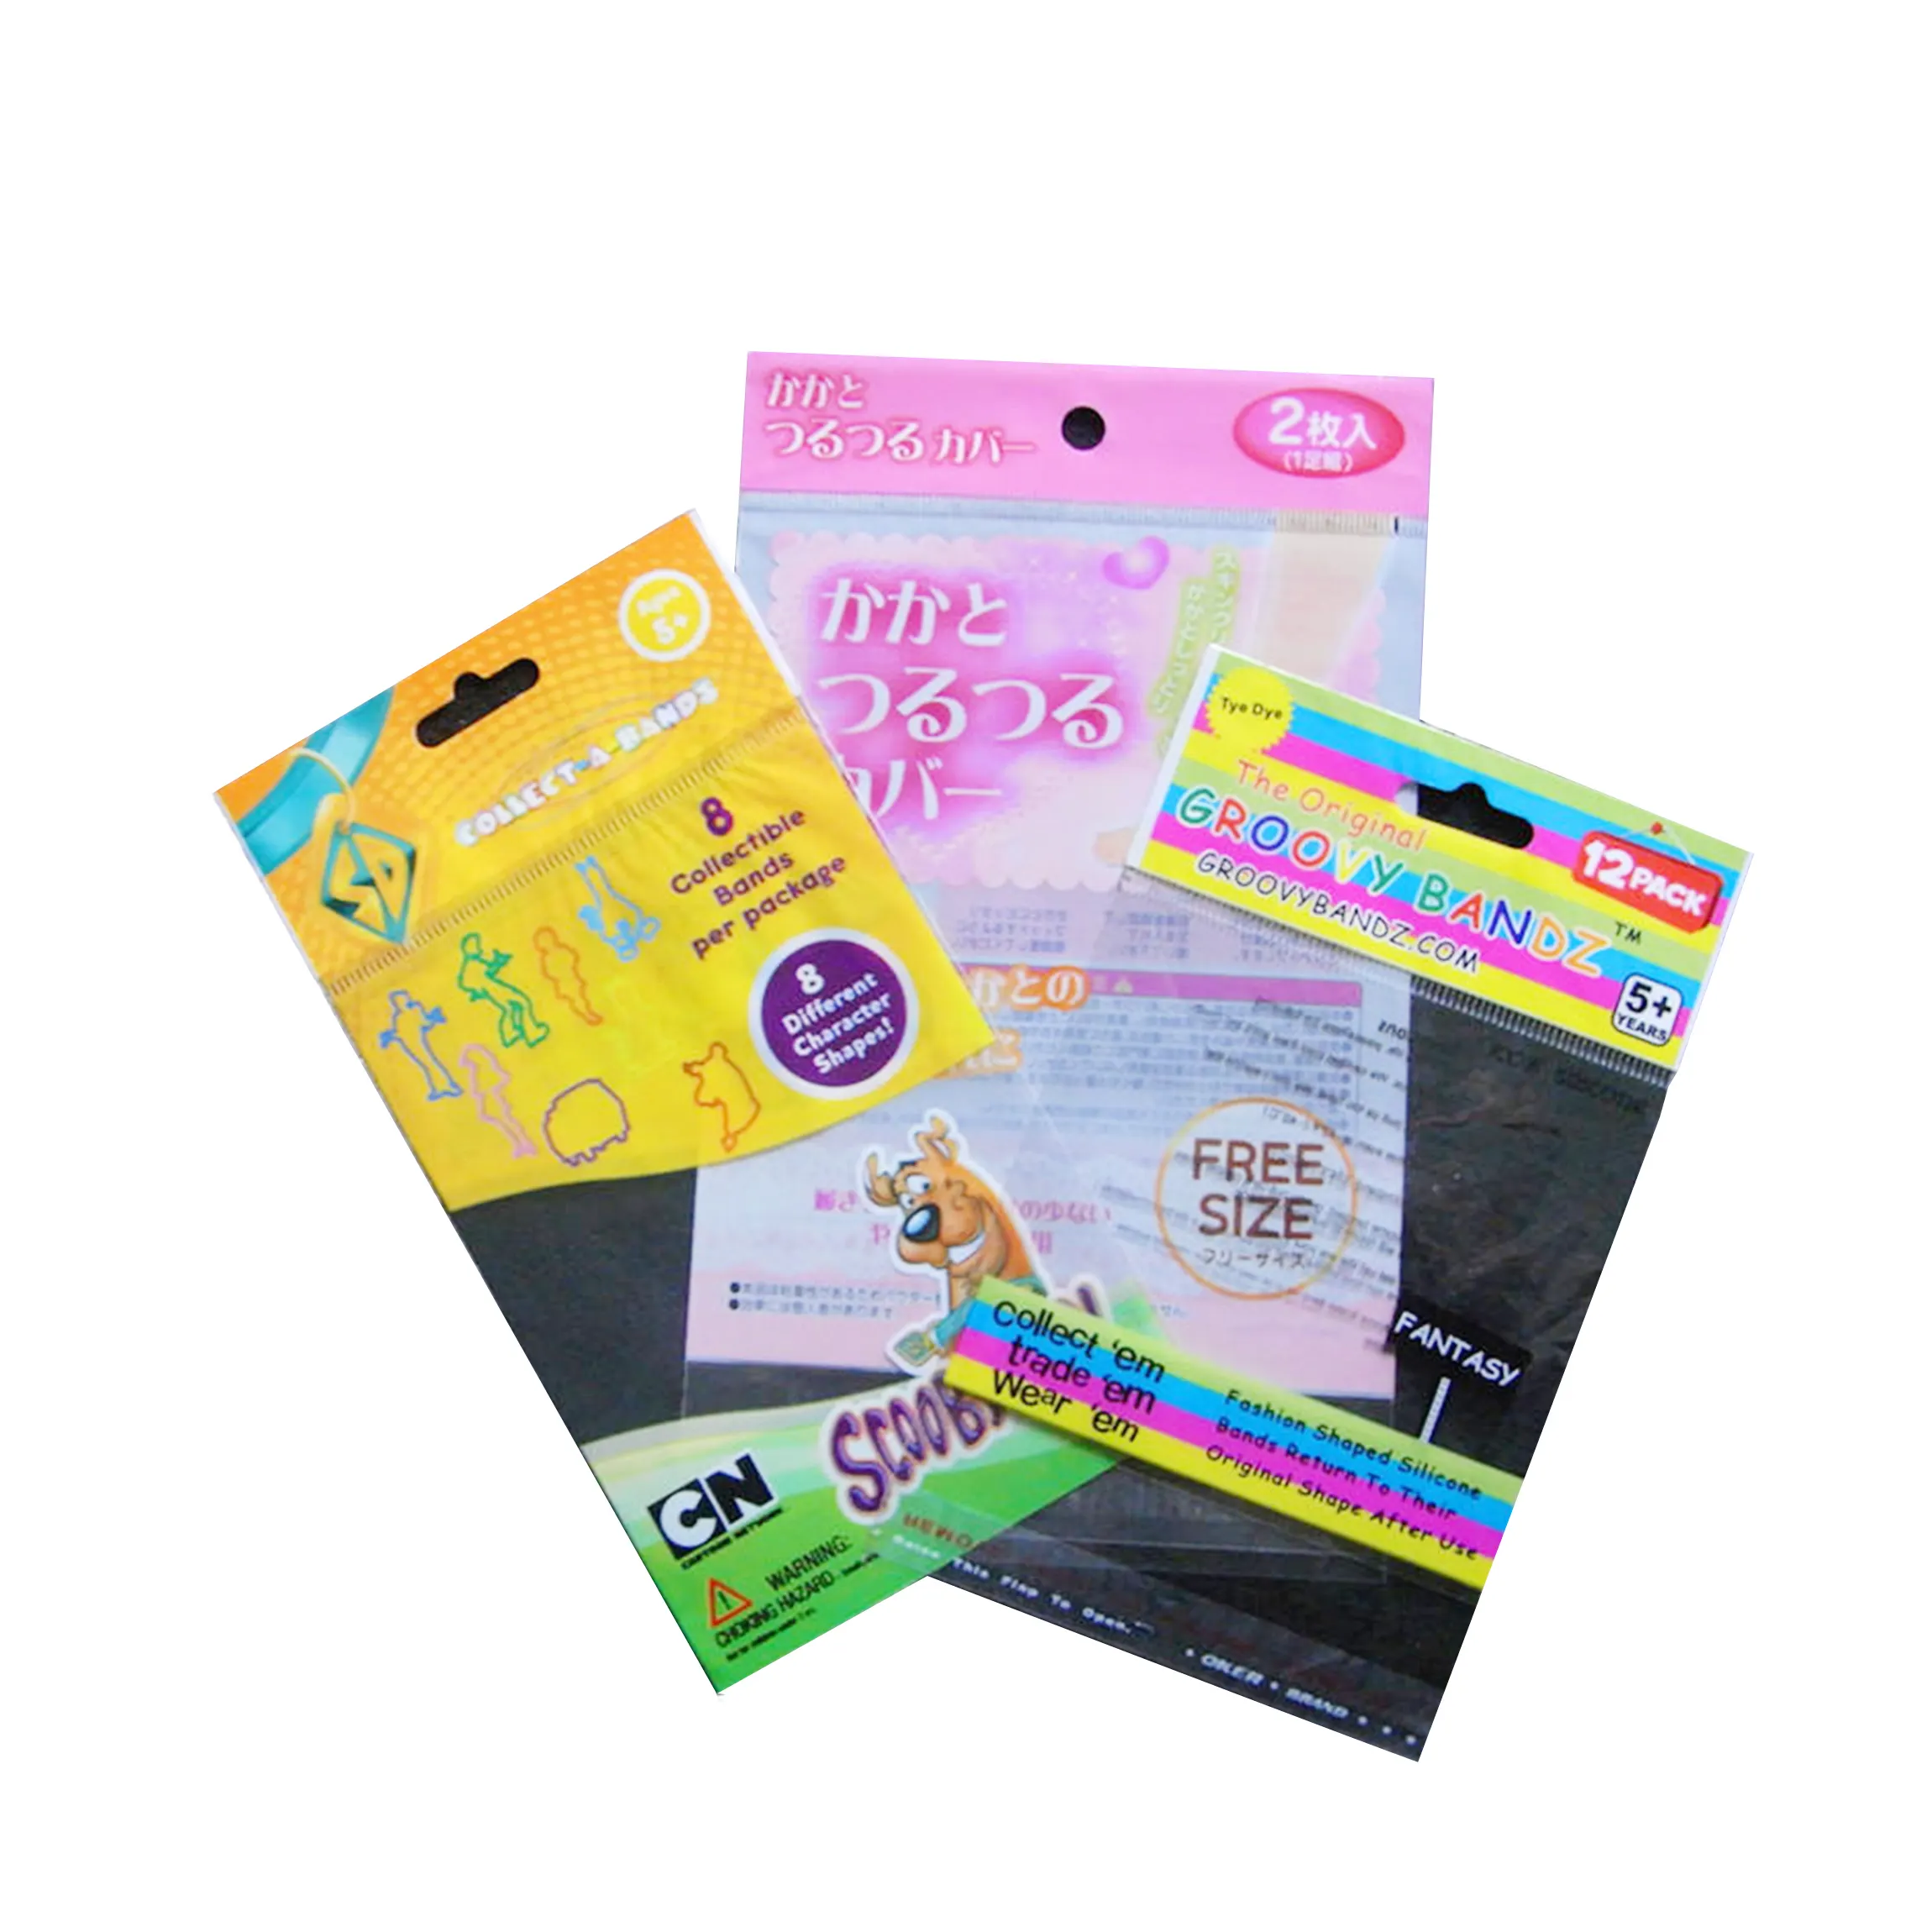 China Factory Header FDA Outfit Small Gift Packing Resealable Opp Plastic Bags With Sticky Seal Header Opp/cpp Bag Packaging